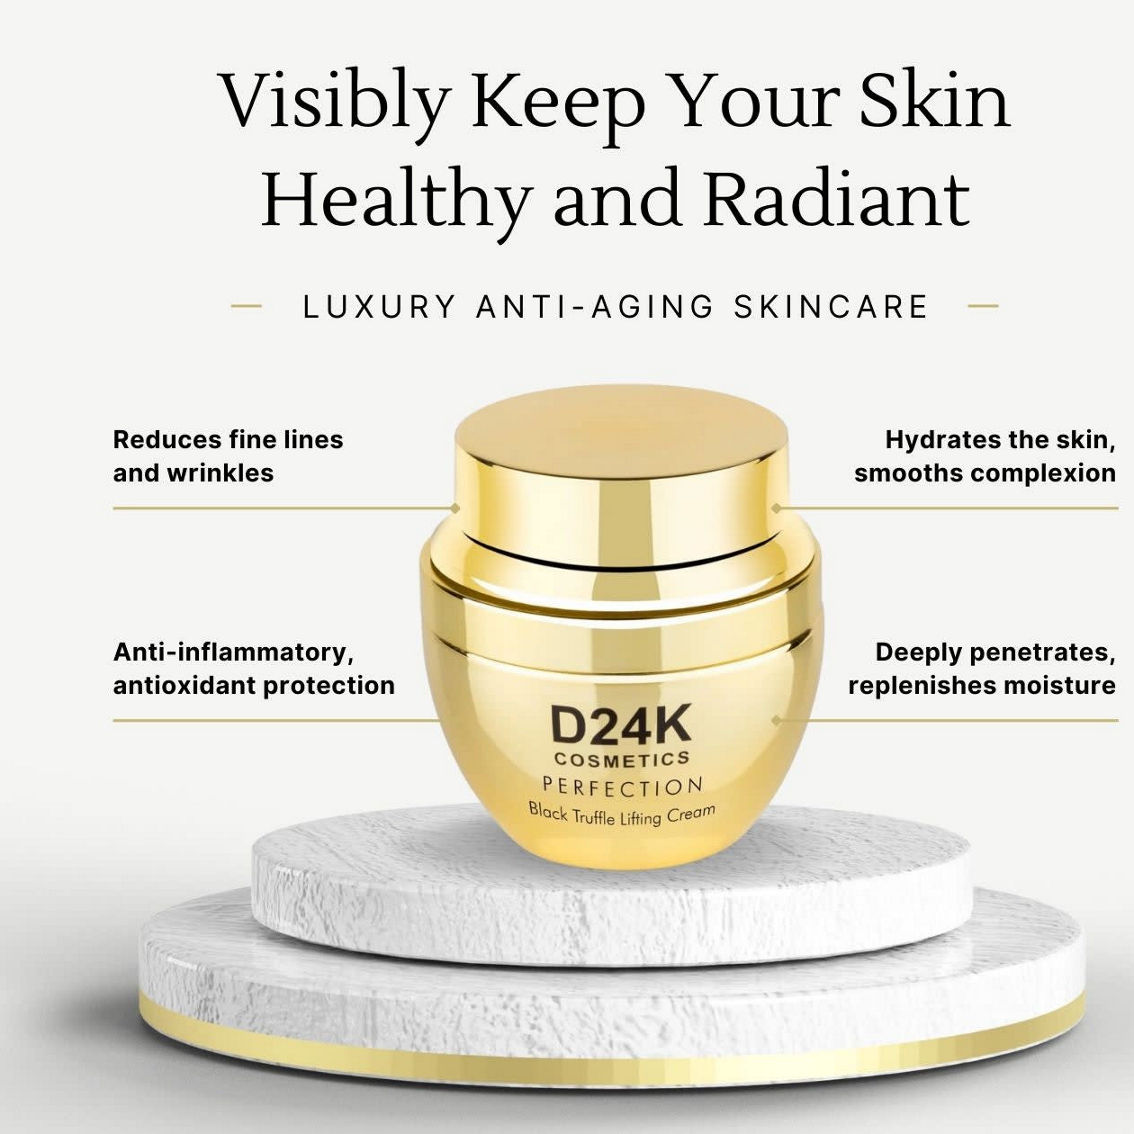 D24K Perfection Lifting Cream with Black Truffle & Black Pearl - Image 3 of 3